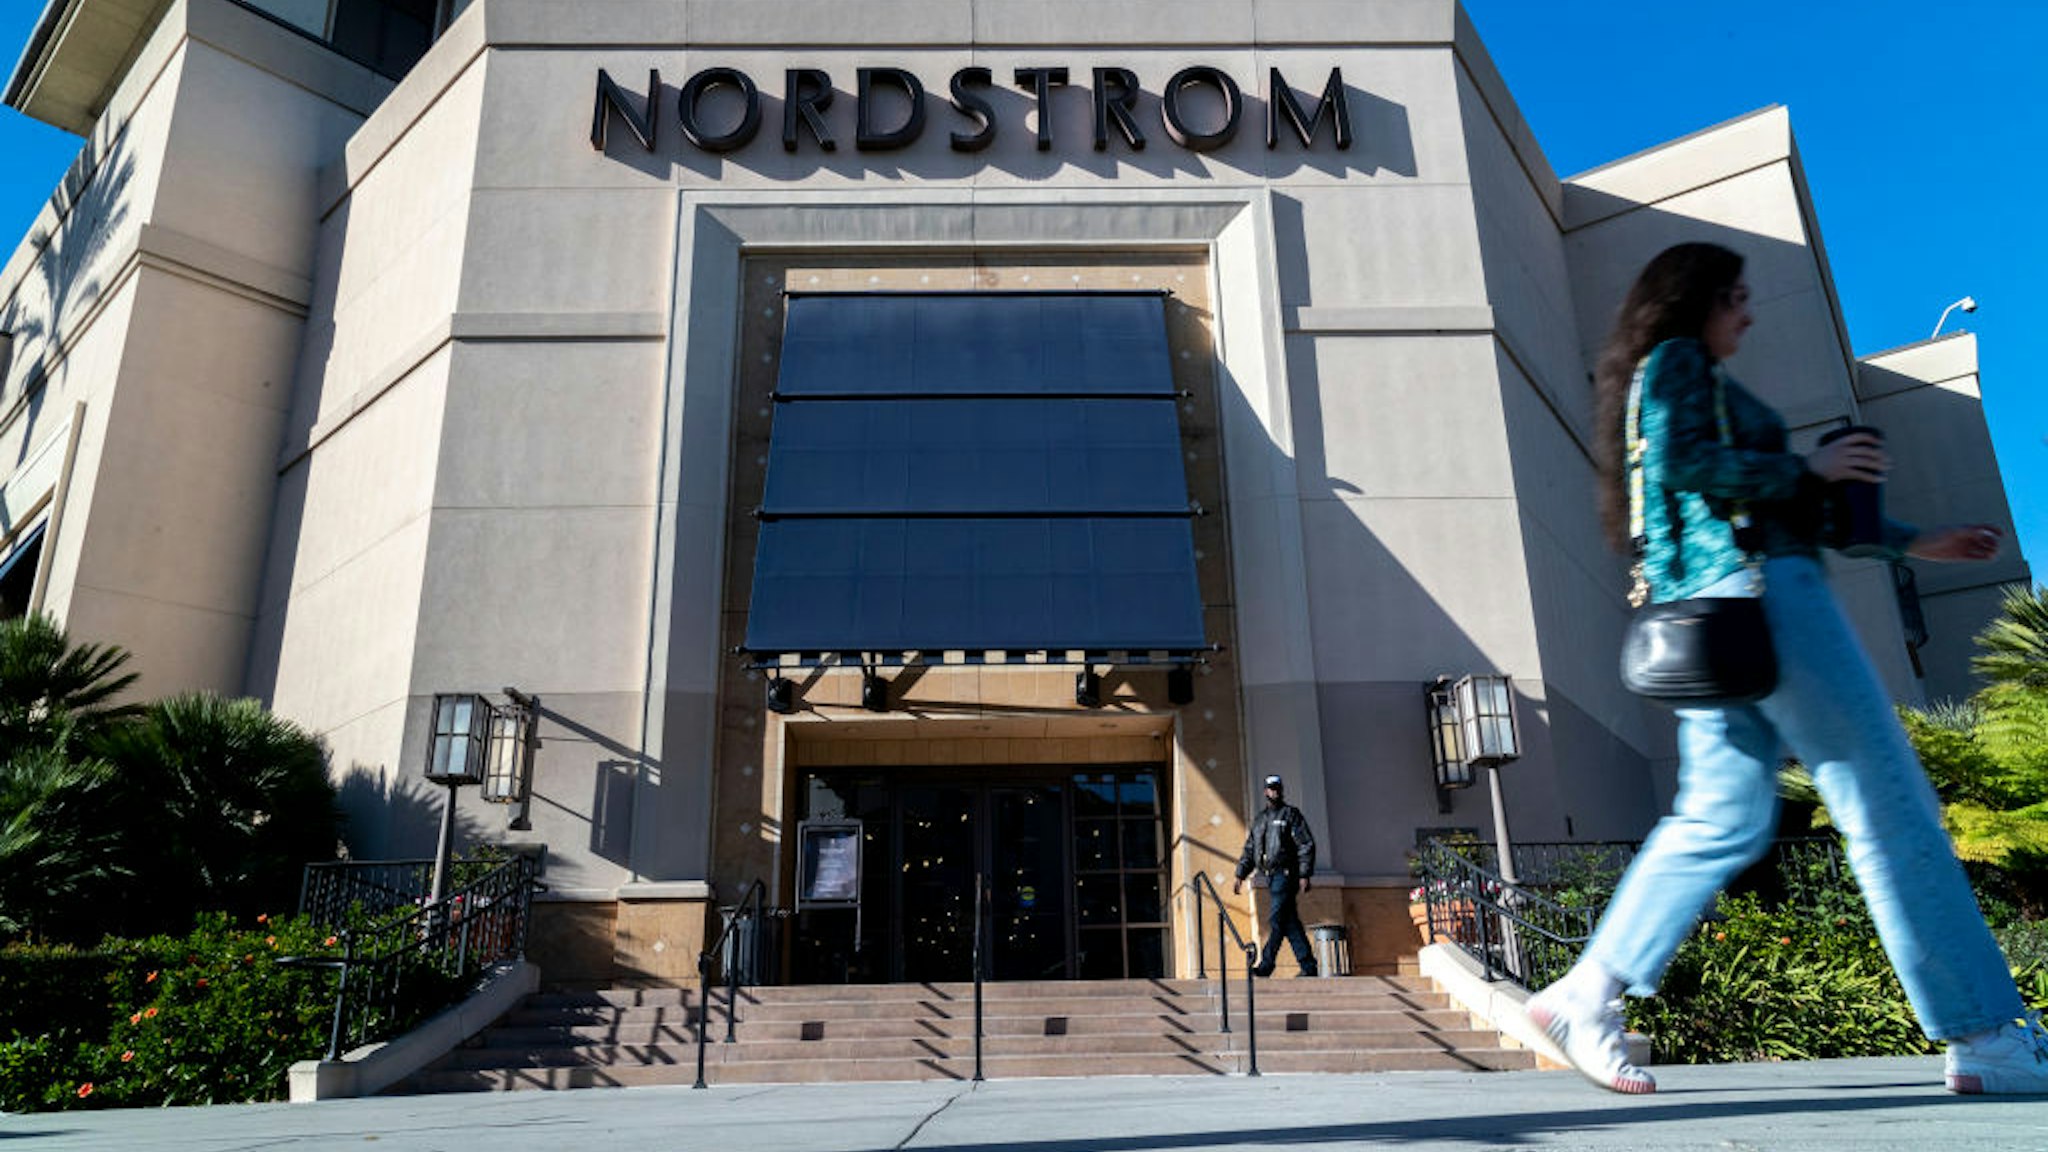 LOS ANGELES, CA - NOVEMBER 23, 2021: A security guard patrols the front entrance of Nordstrom on Tuesday after an organized group of thieves attempted a smash-and-grab robbery late Monday night at The Grove location November 23, 20201 in Los Angeles, California. (Gina Ferazzi / Los Angeles Times via Getty Images)